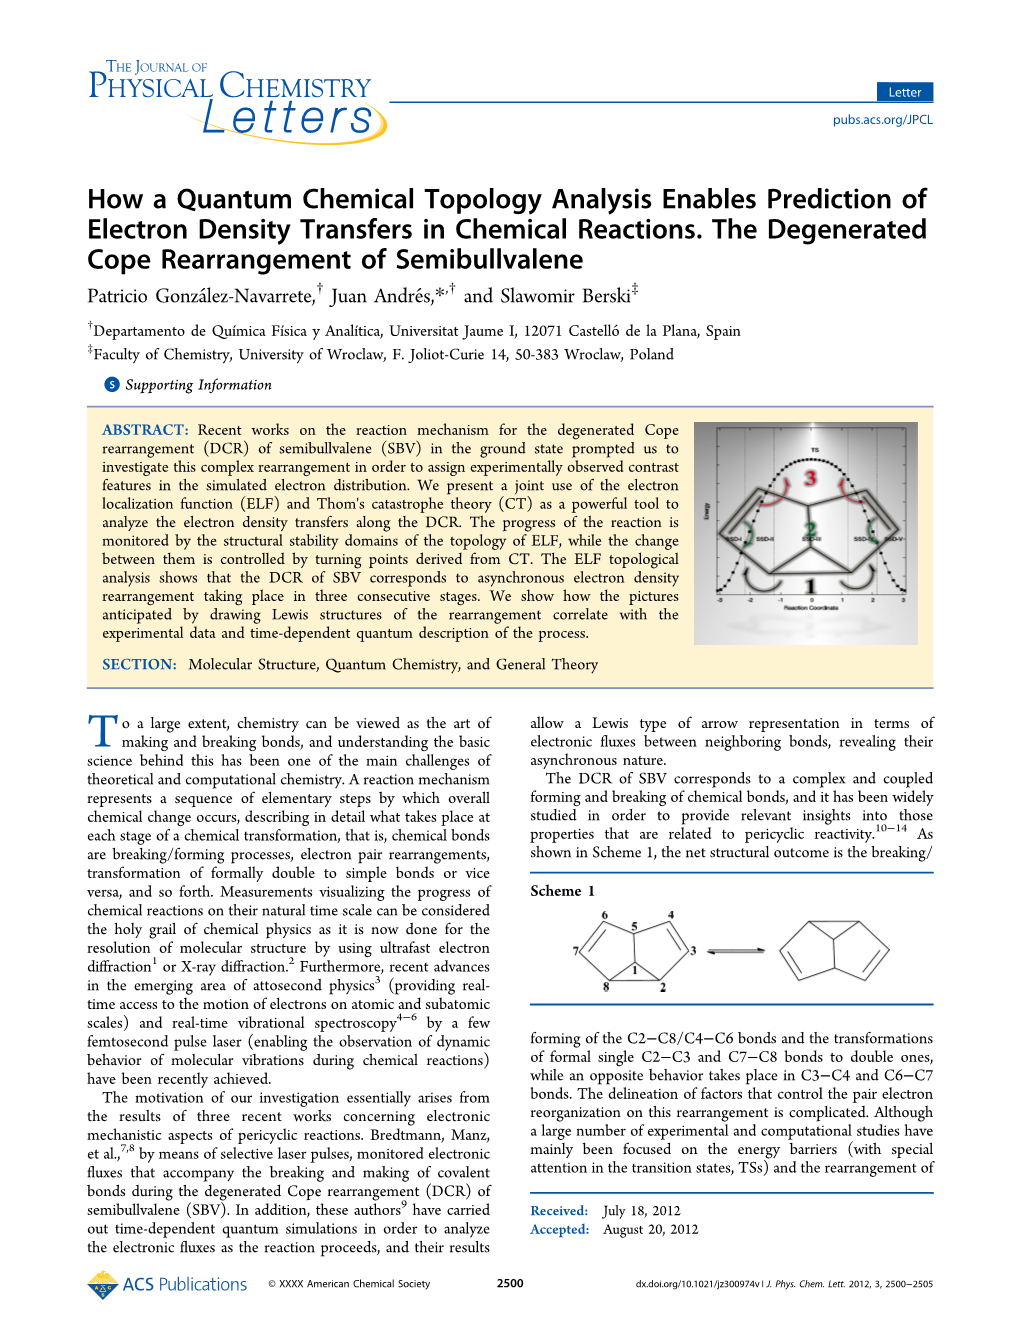 How a Quantum Chemical Topology Analysis Enables Prediction of Electron Density Transfers in Chemical Reactions